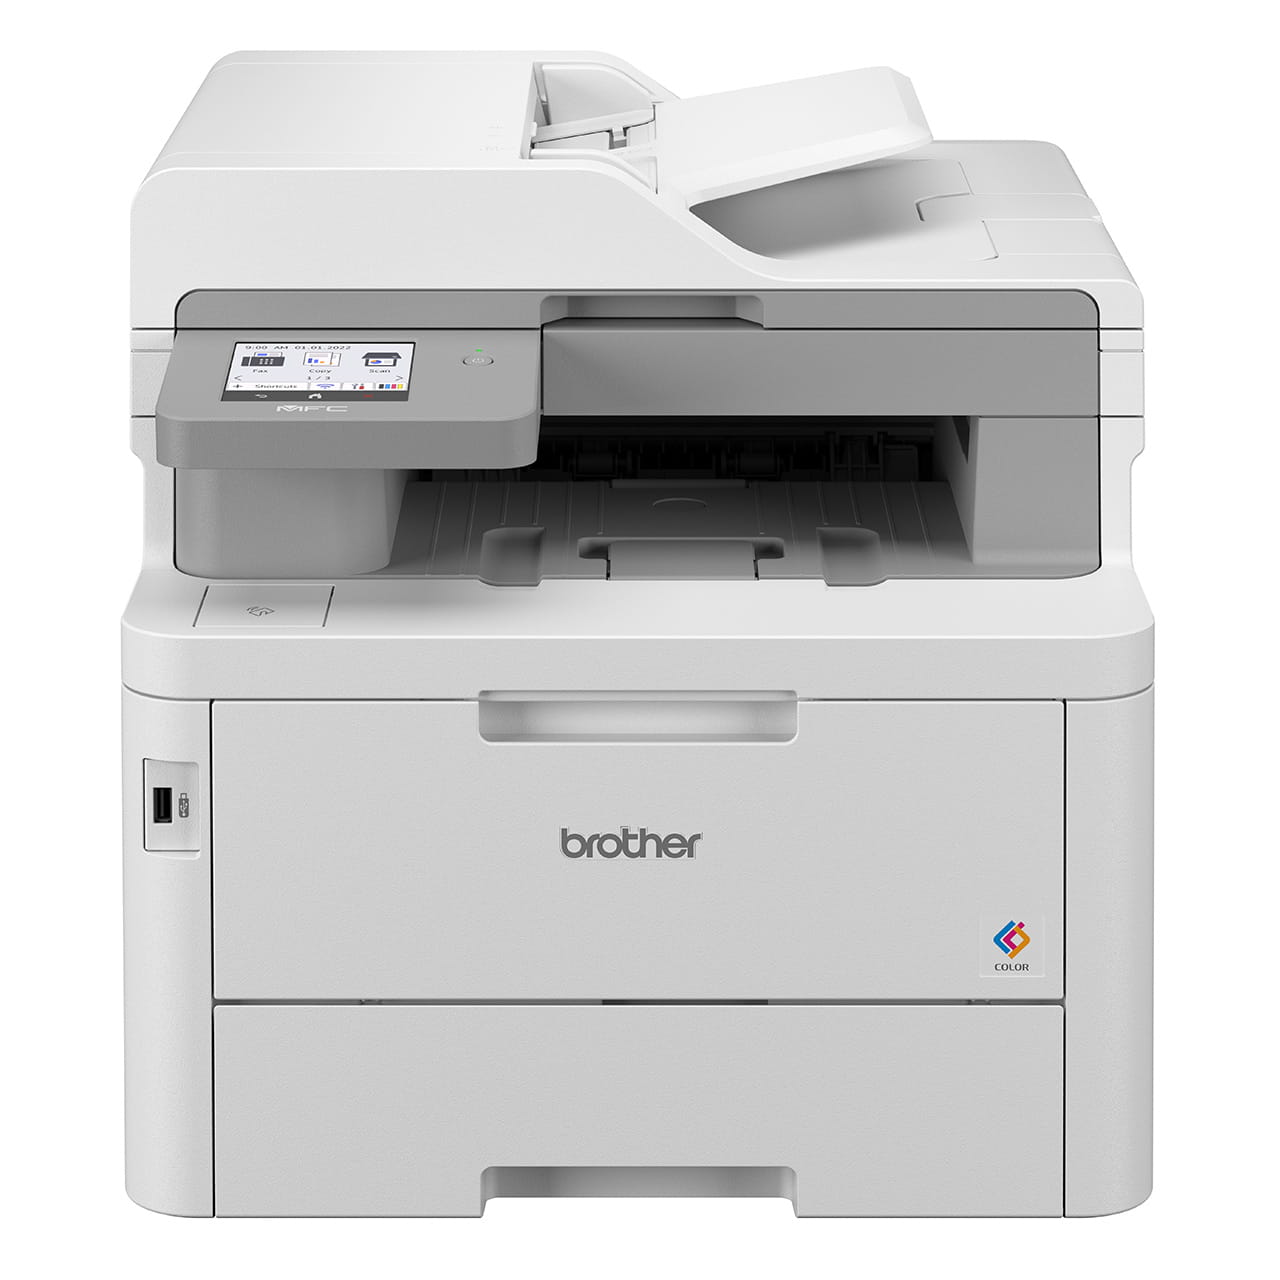 Brother MFC-L8390CDW Colour Laser Printer Front View